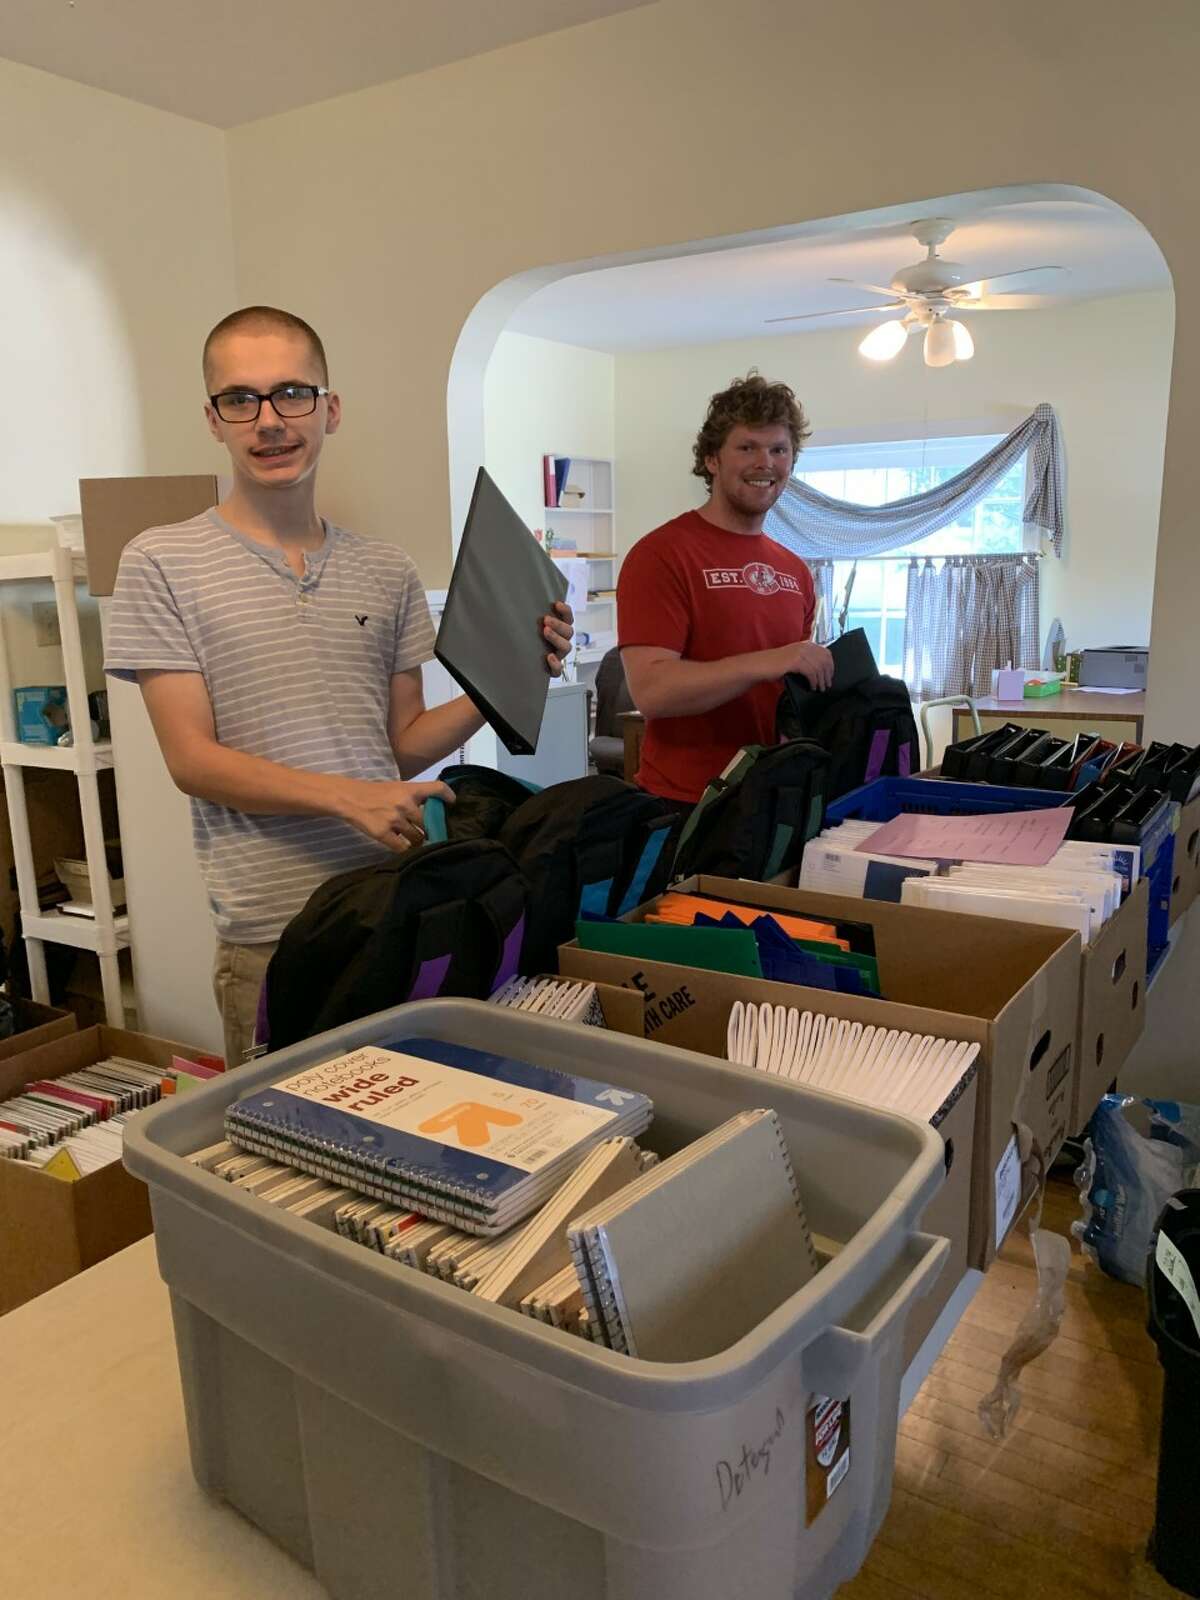 Manna Pantry volunteers fill backpacks for the back to school backpack giveaway. School supplies are free to clients with children in fifth through twelfth grade. Volunteers Zach (left) and Lewis help sort supplies and fill backpacks.